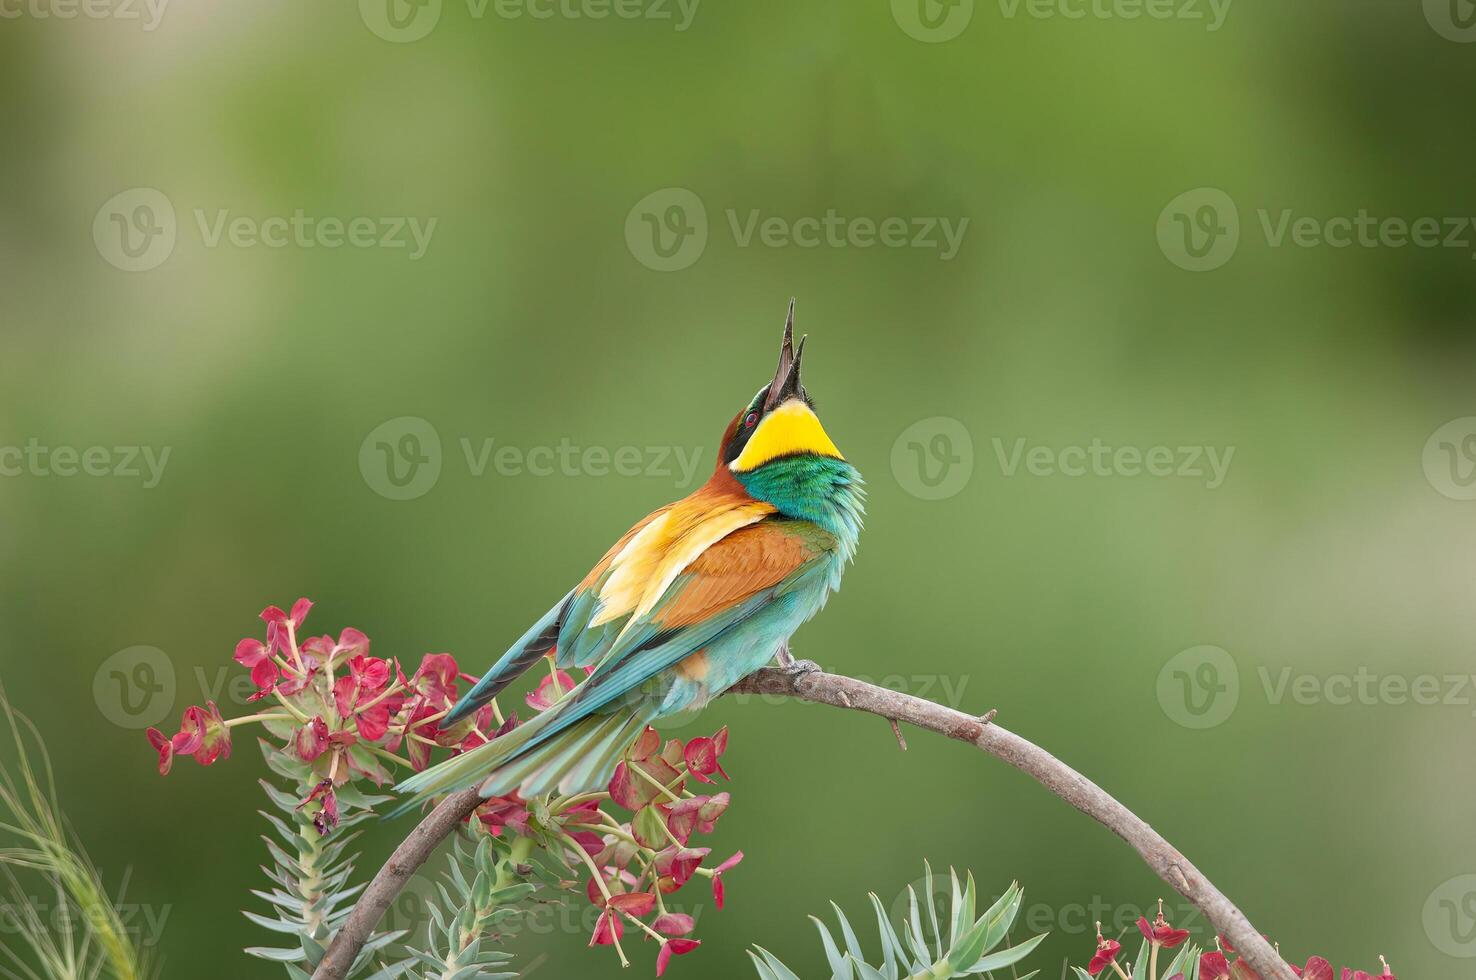 European Bee-eater, Merops apiaster, looking at the sky. Green background. Colourful birds. photo